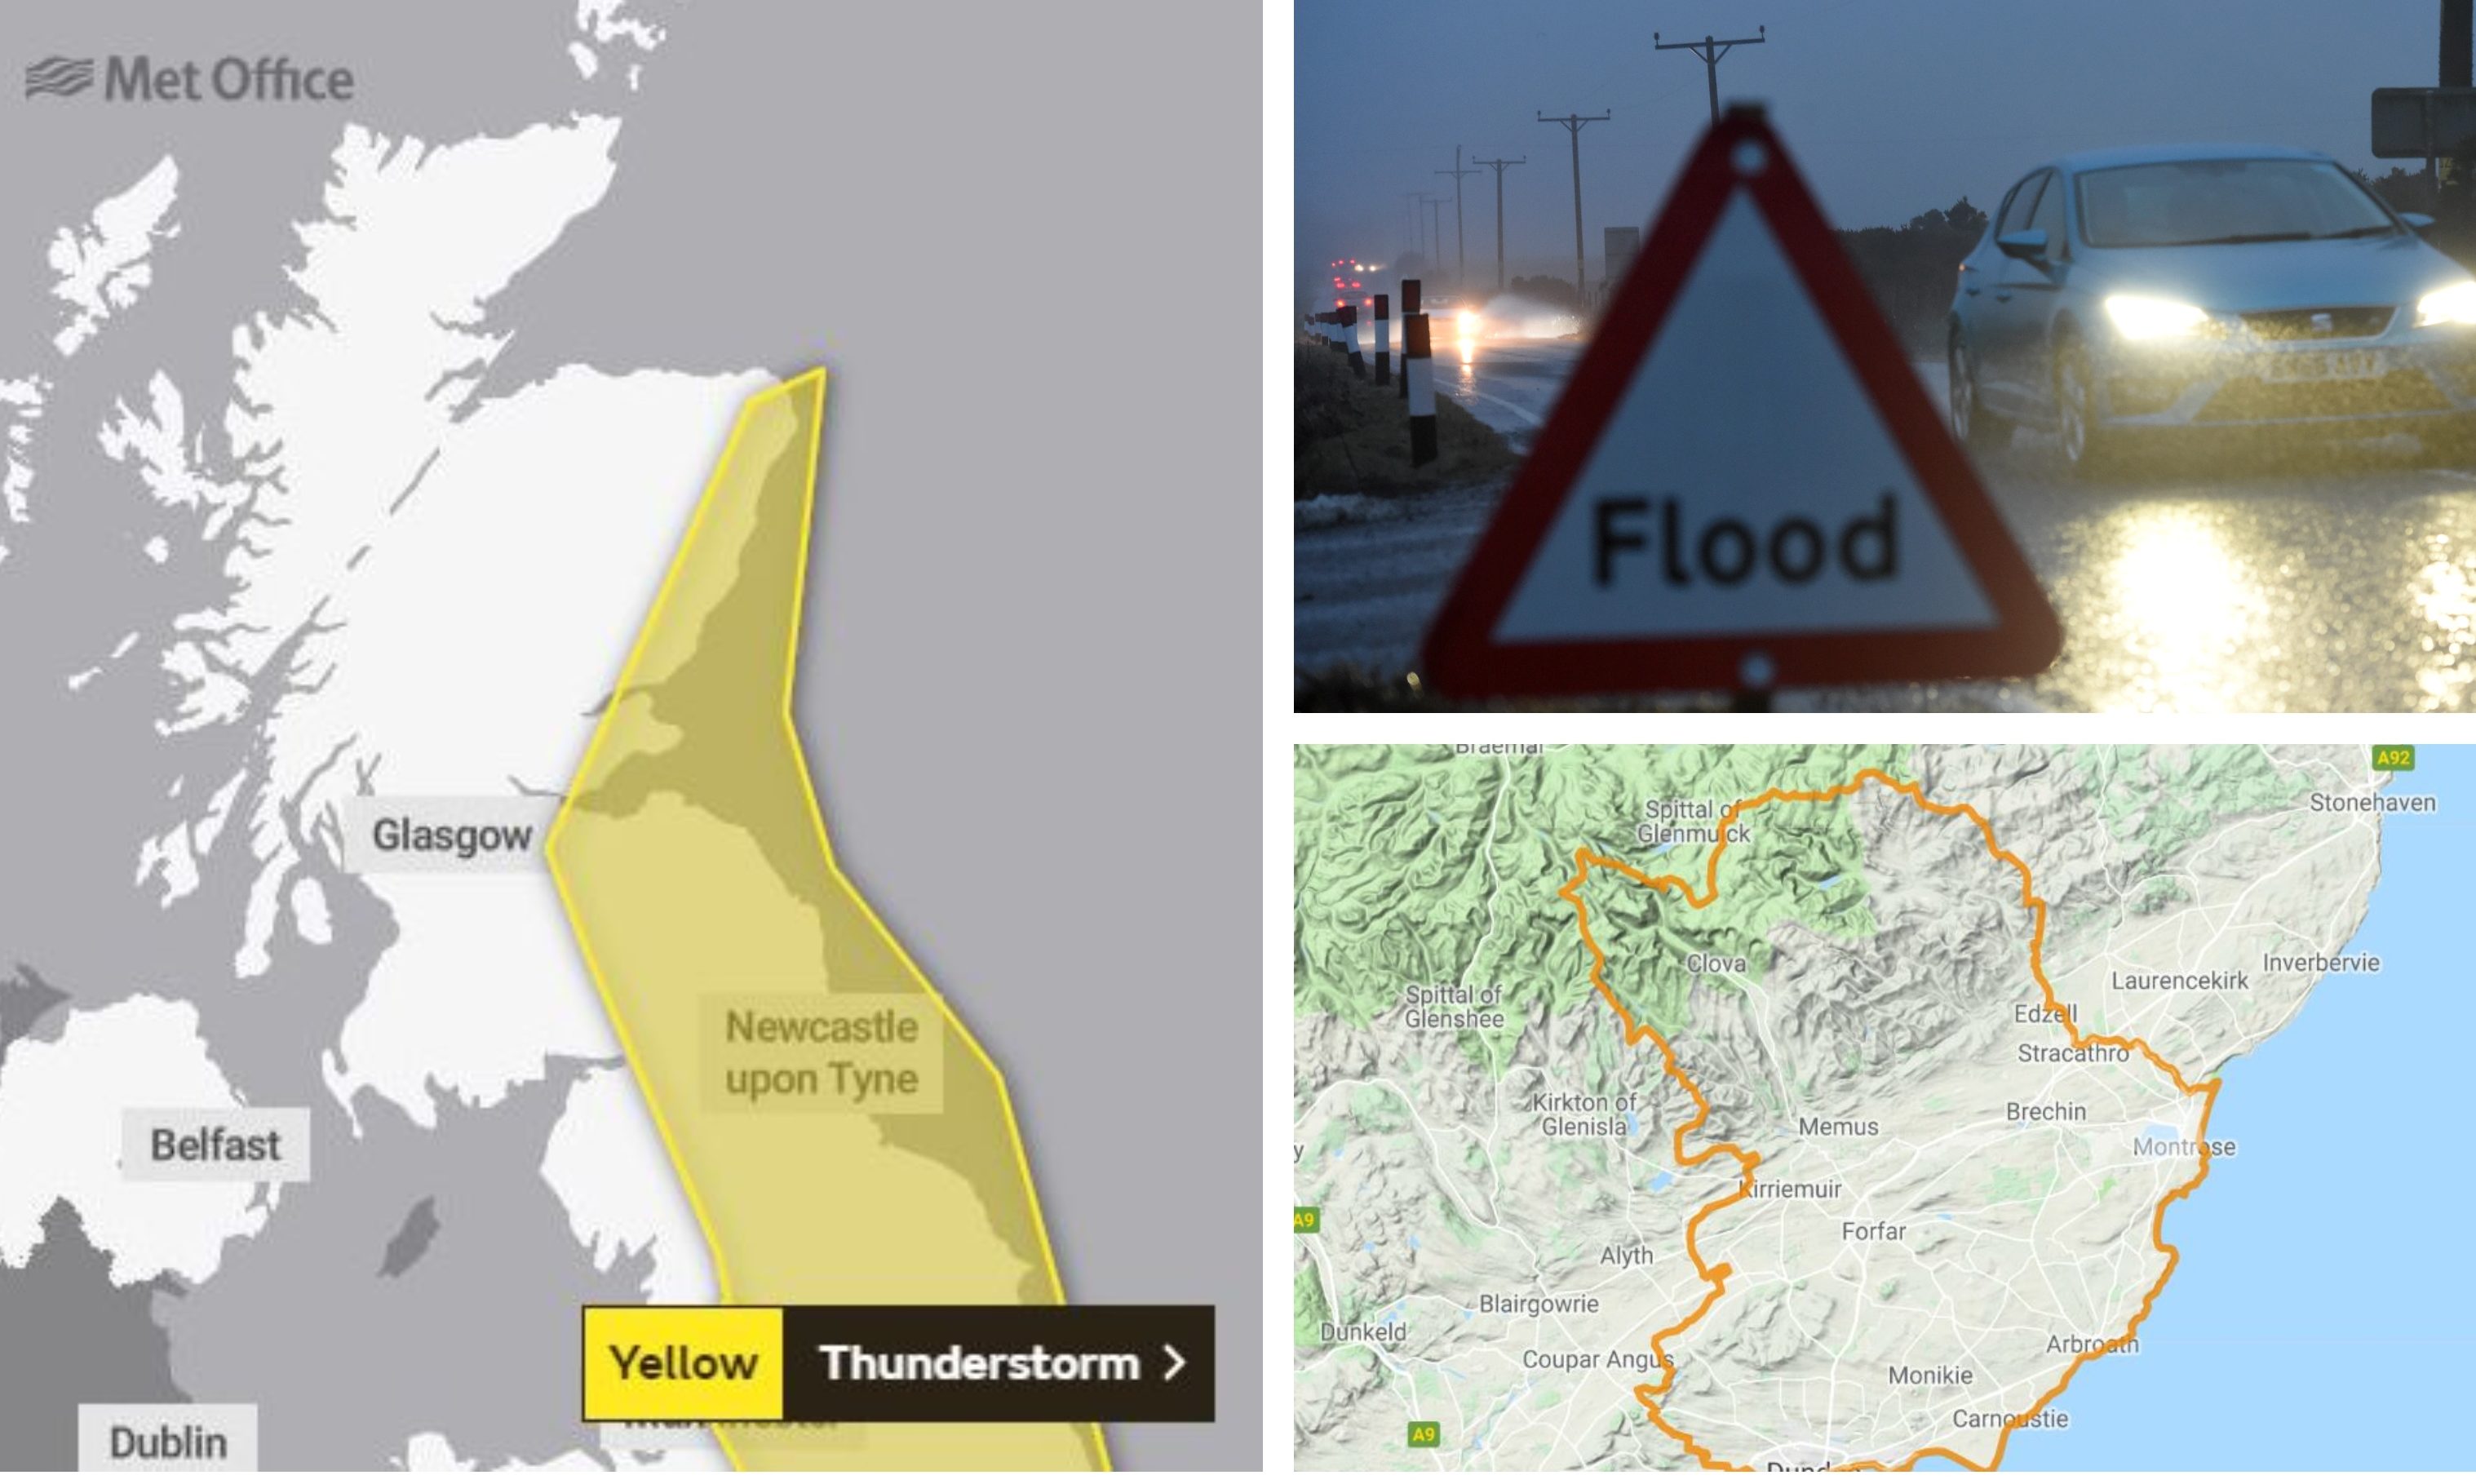 Flooding and thunderstorms have been predicted.